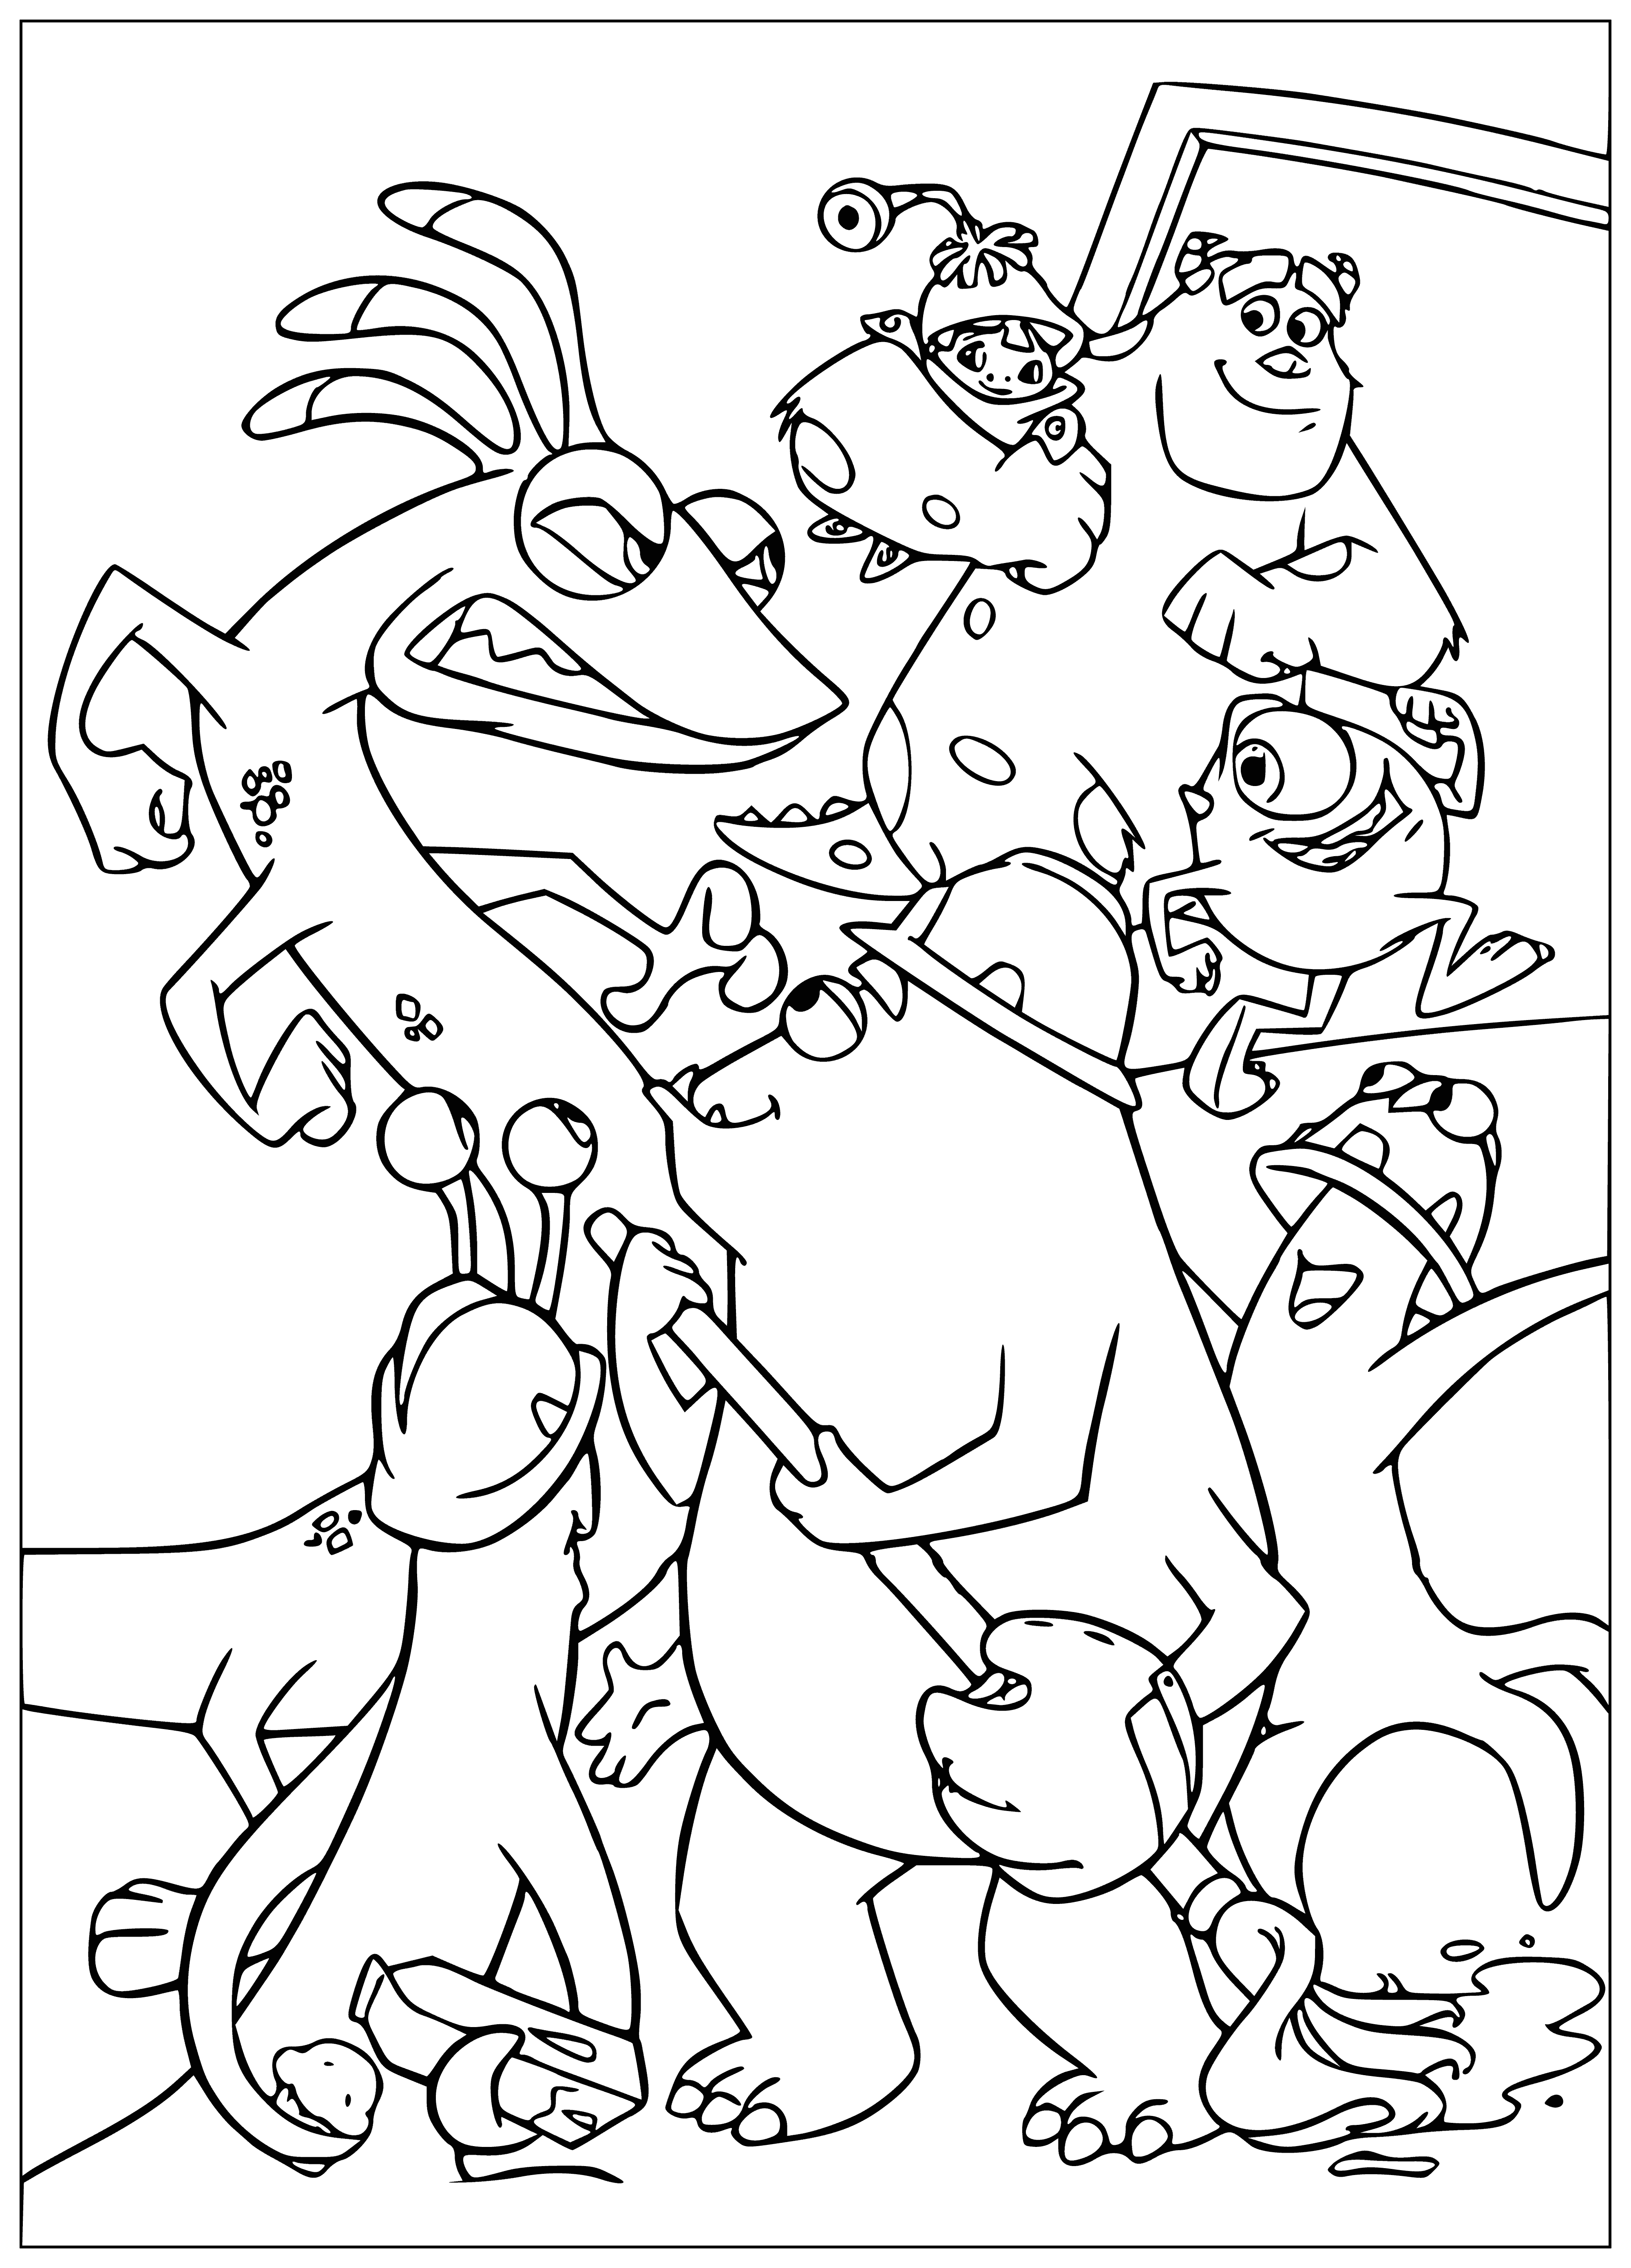 Escape from Randle coloring page